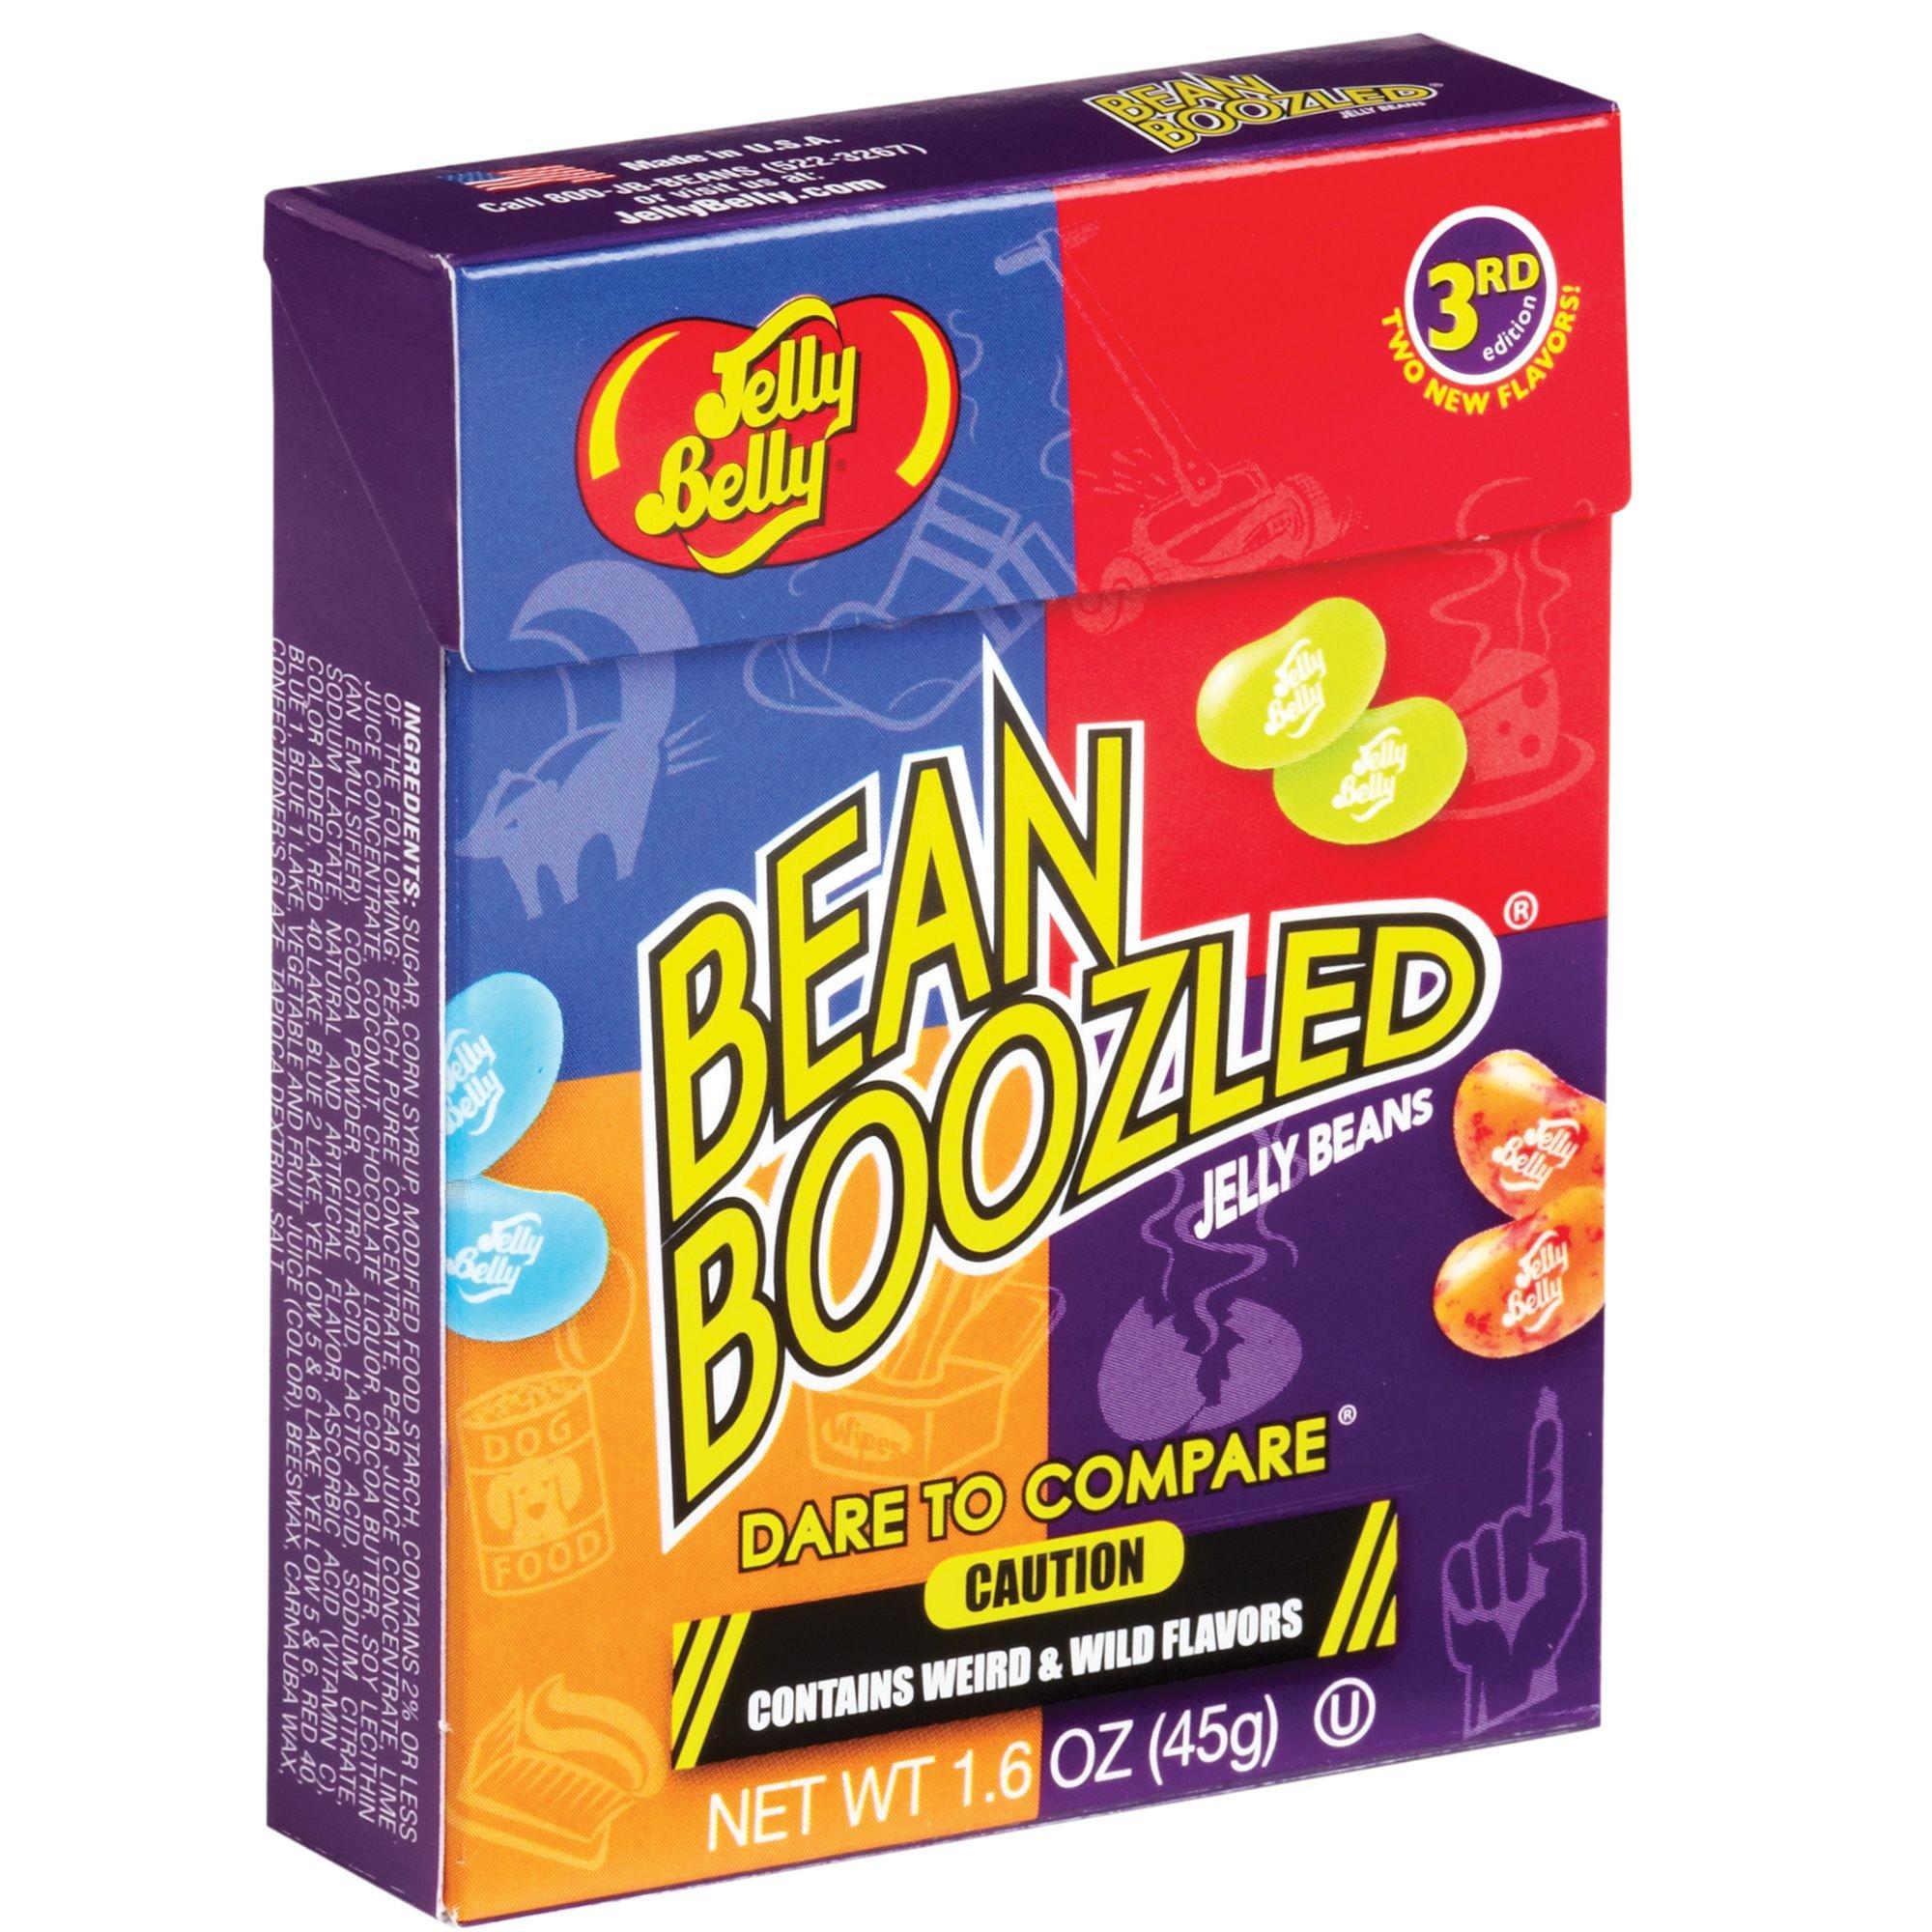 are jelly belly jelly beans bad for dogs